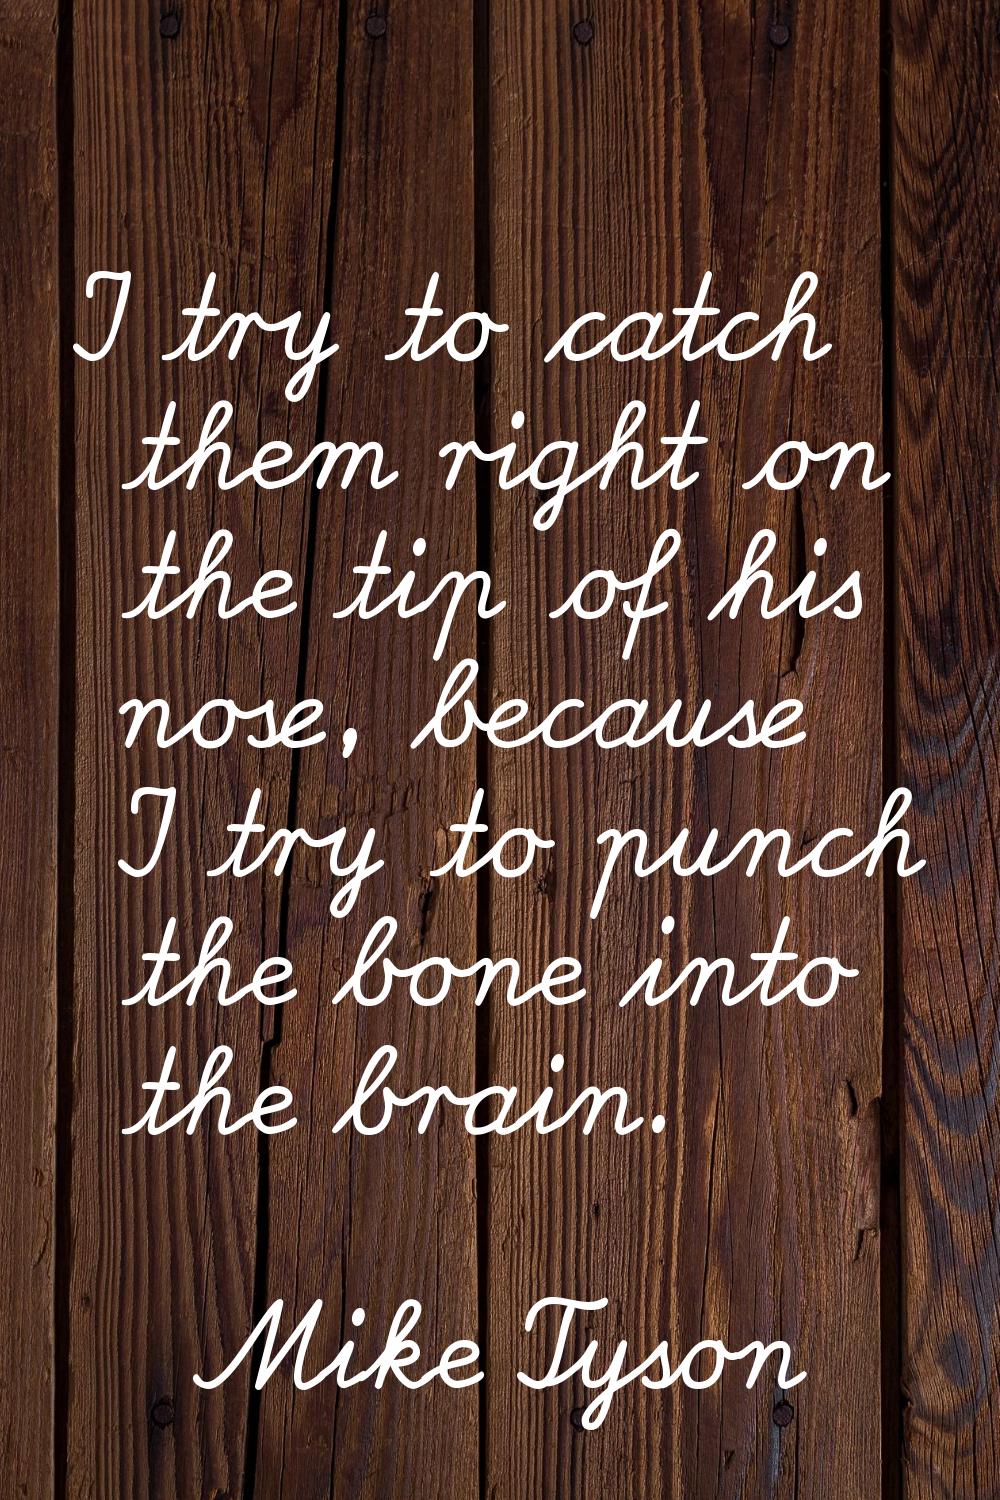 I try to catch them right on the tip of his nose, because I try to punch the bone into the brain.